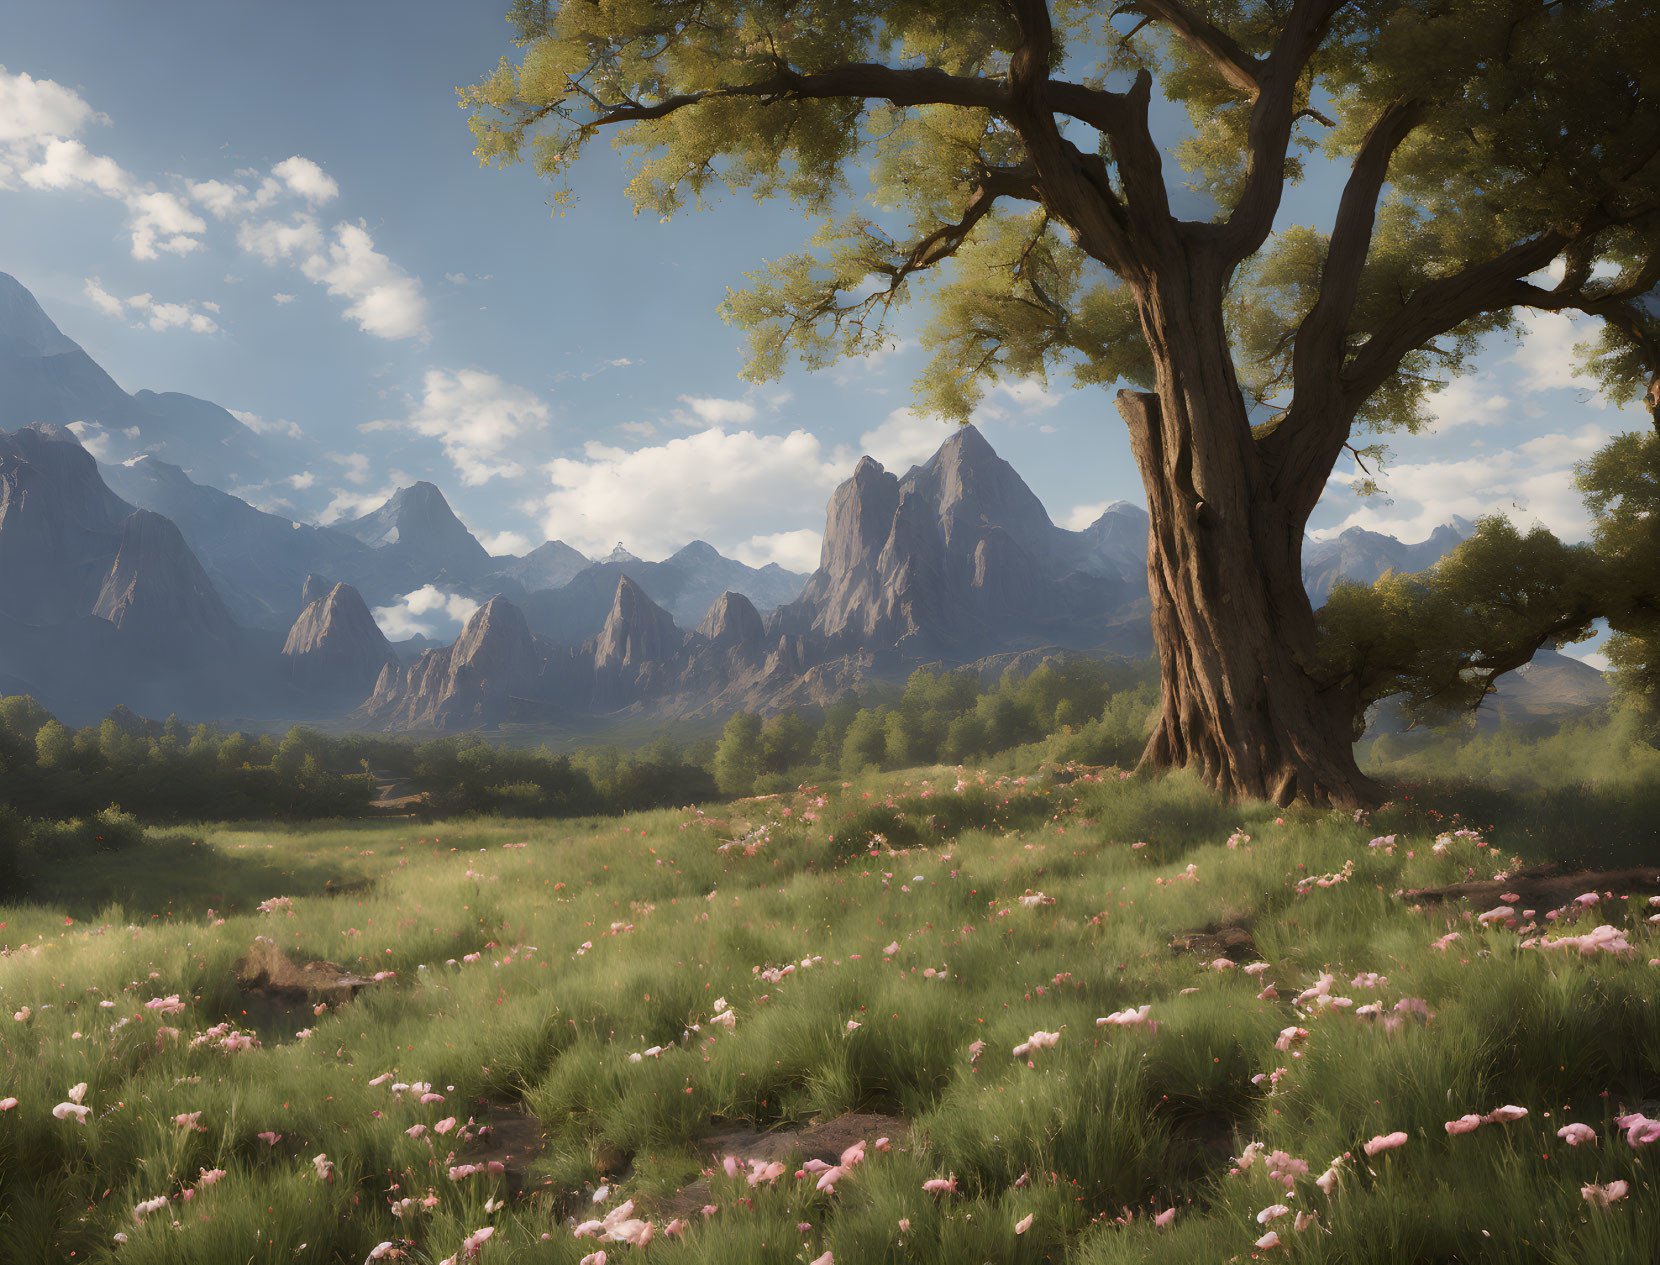 Tranquil landscape with solitary tree, pink flowers, and distant mountains